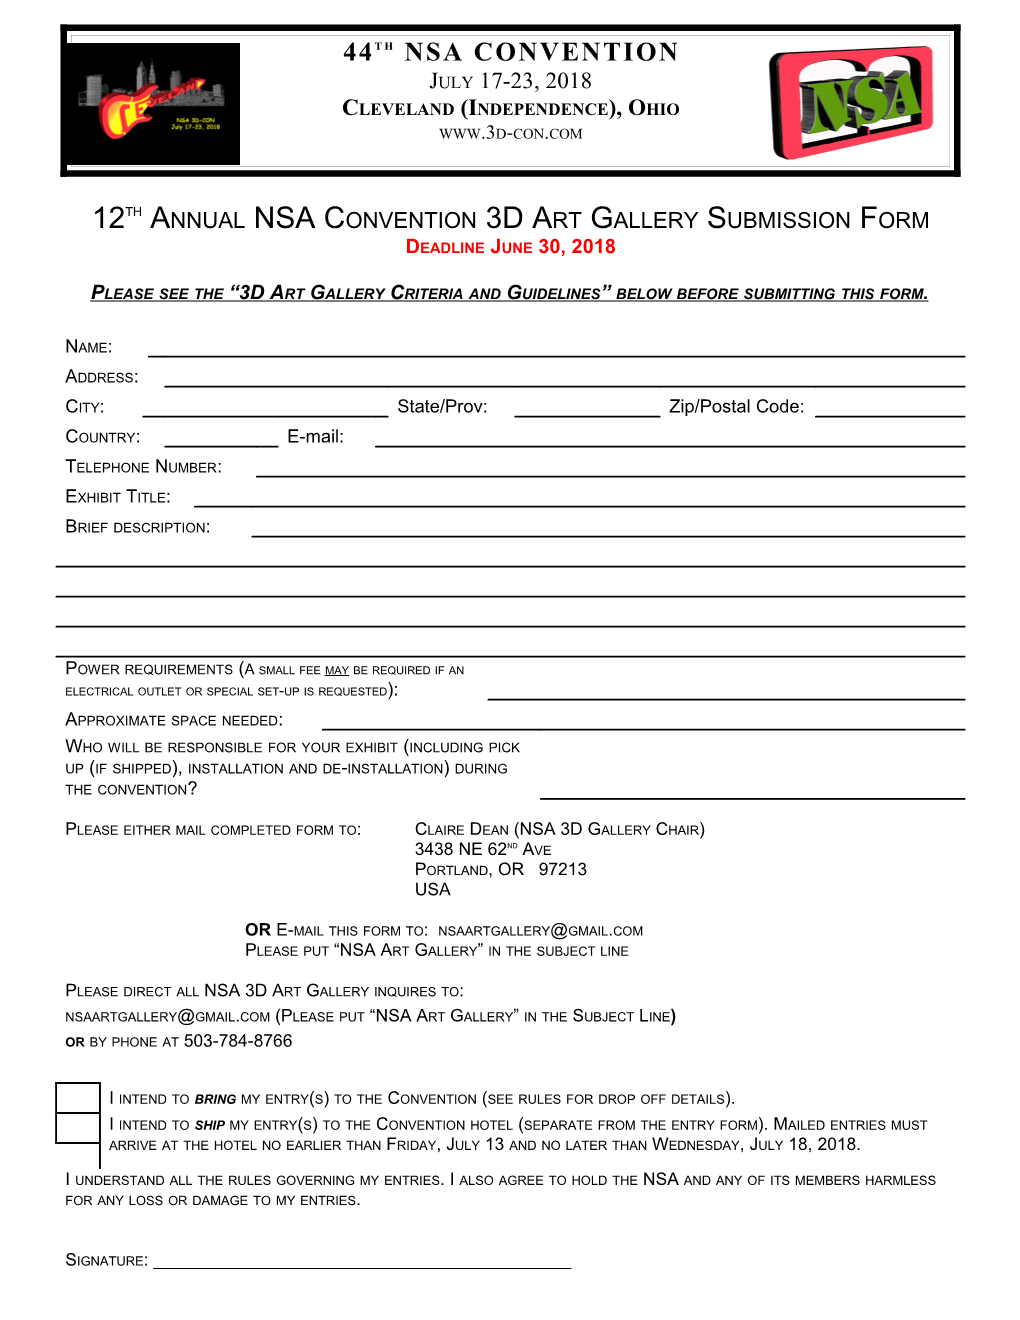 12Th Annual NSA Convention 3D Art Gallery Submission Form